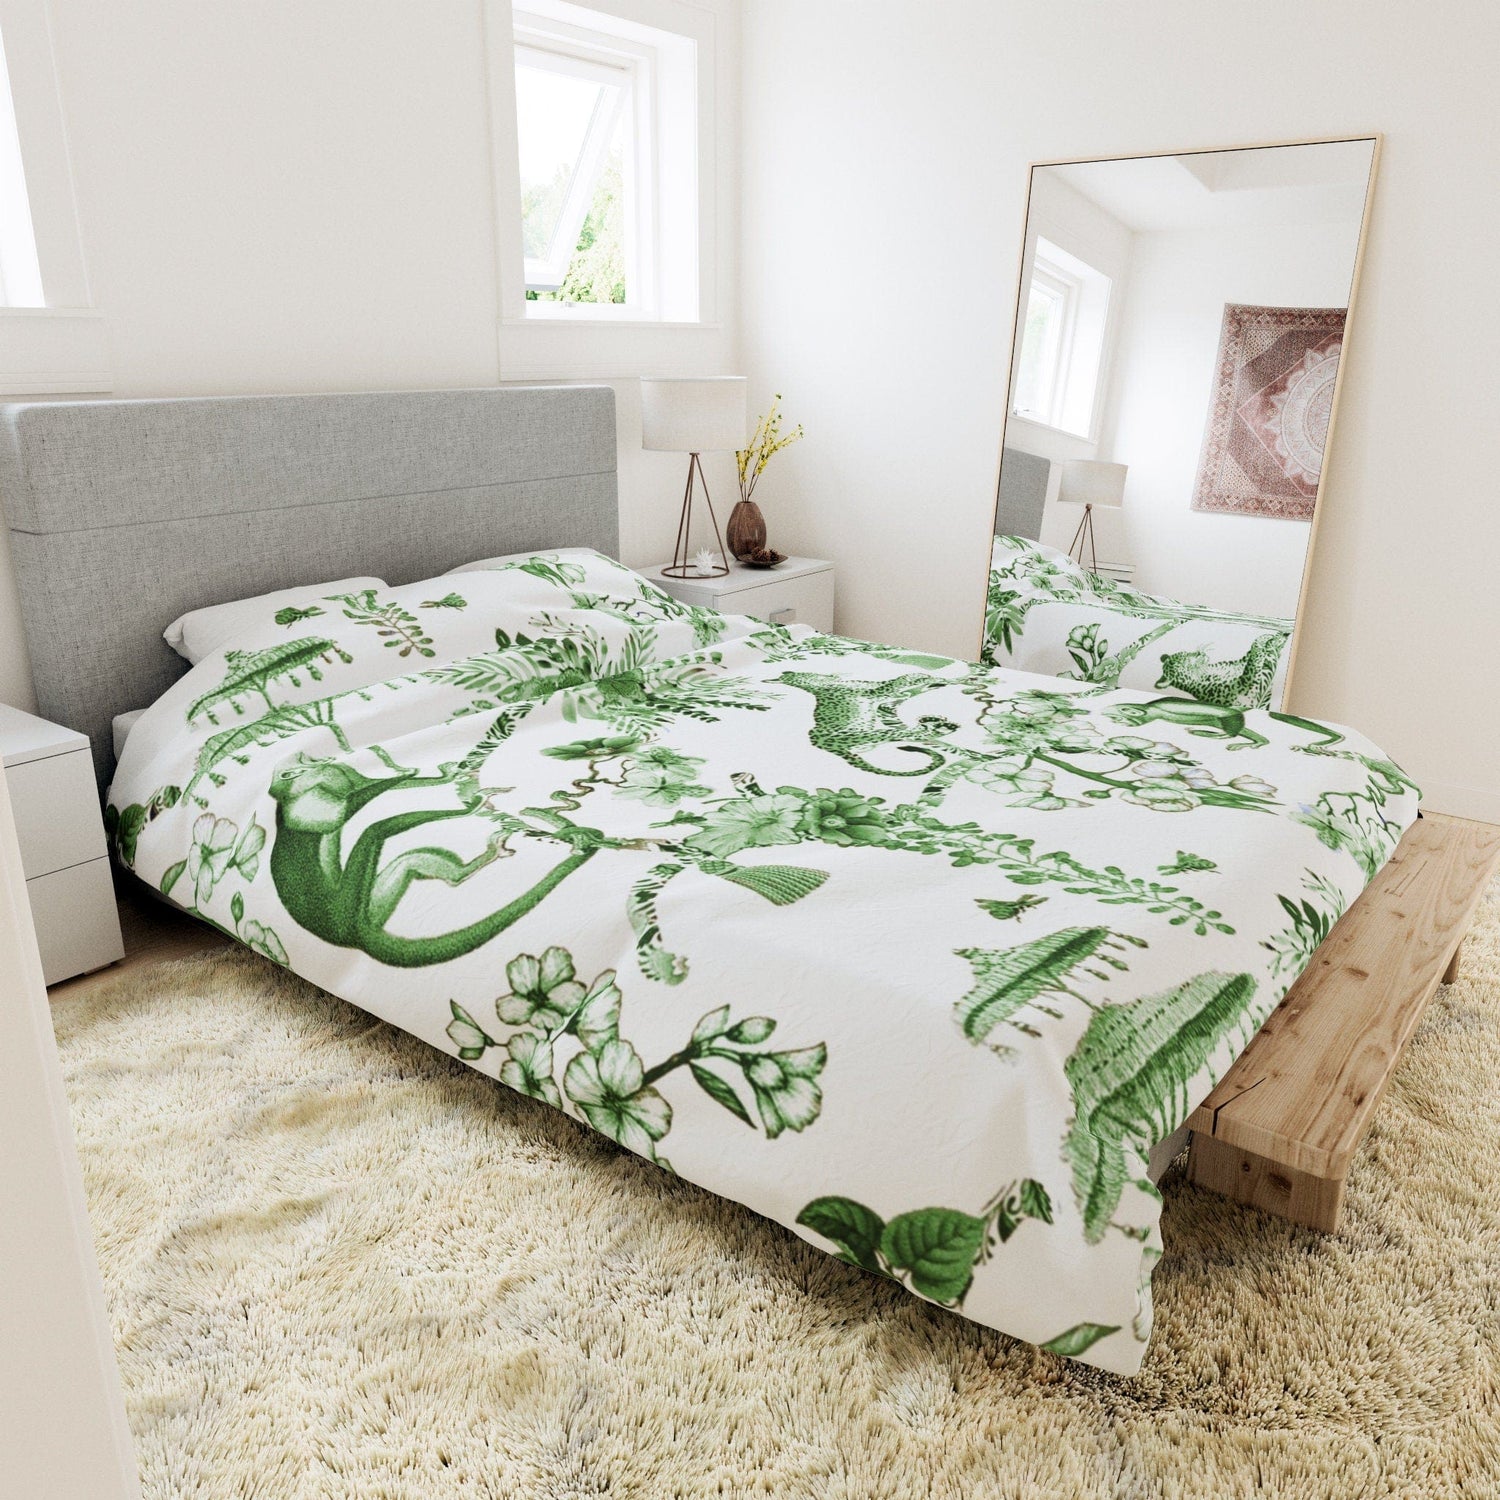 Kate McEnroe New York Chinoiserie Duvet Cover, Floral Green and White Chinoiserie Jungle, Queen, King, Twin, XL Bedding, Botanical Toile Bedding Collection Duvet Covers